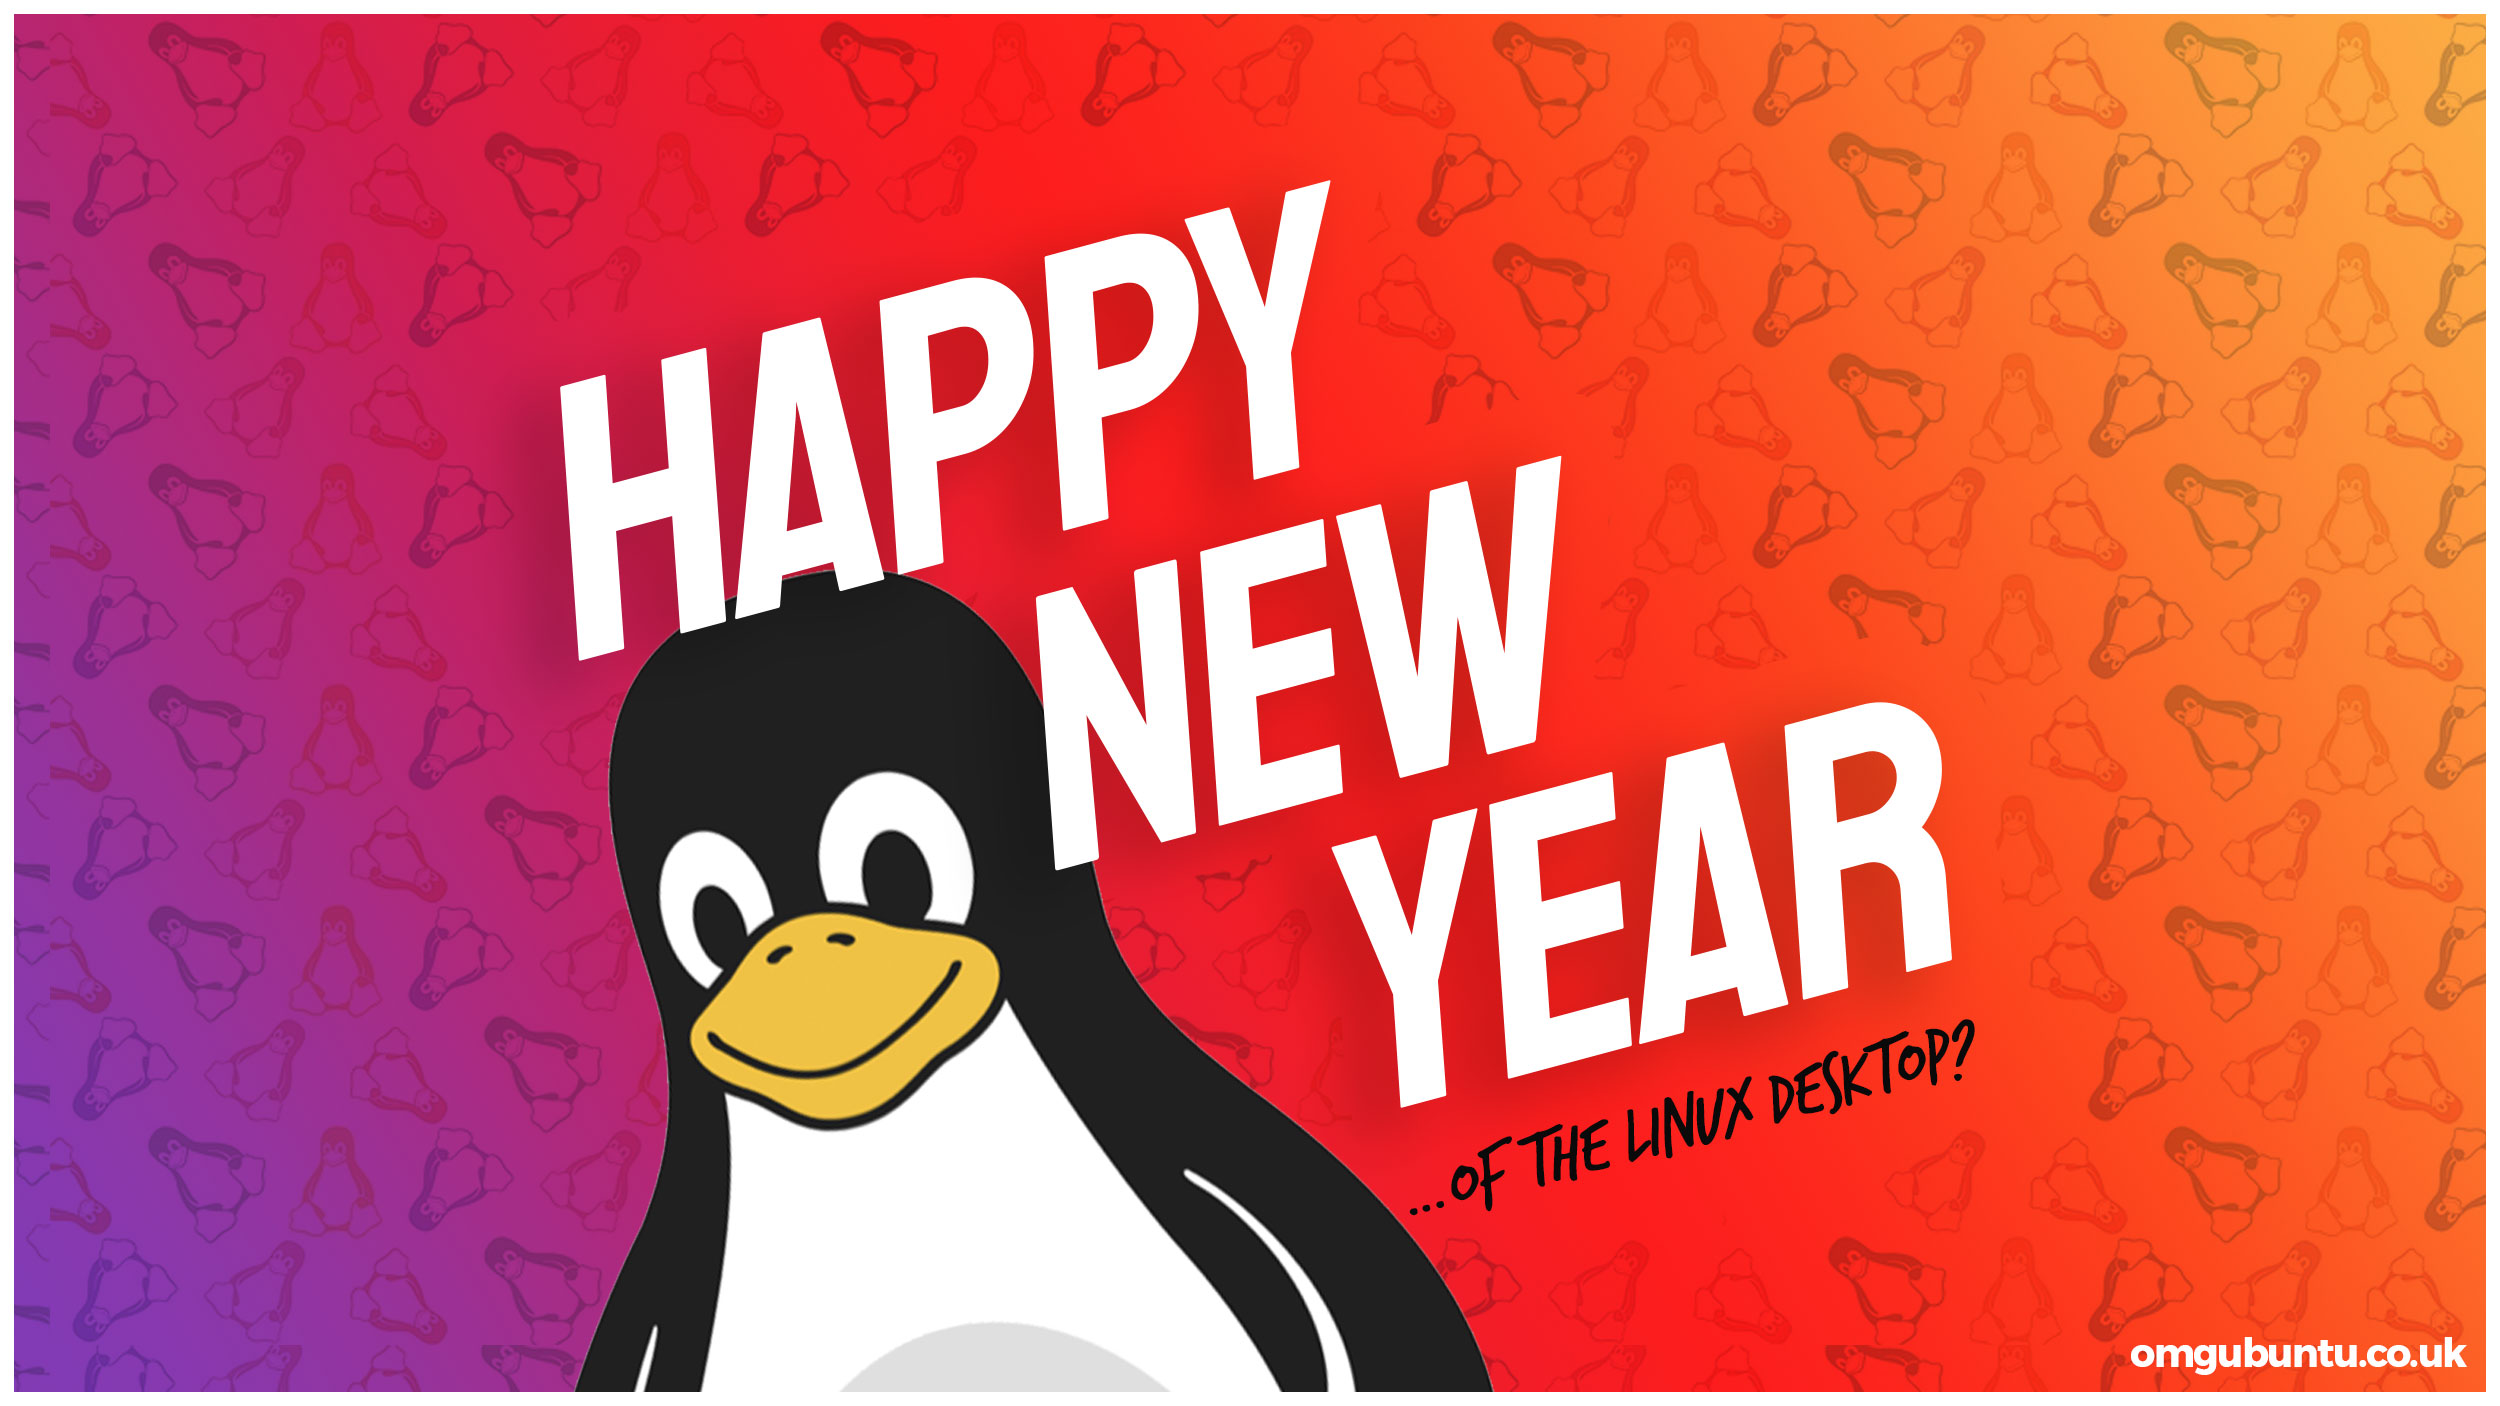 happy new year with linux mascot